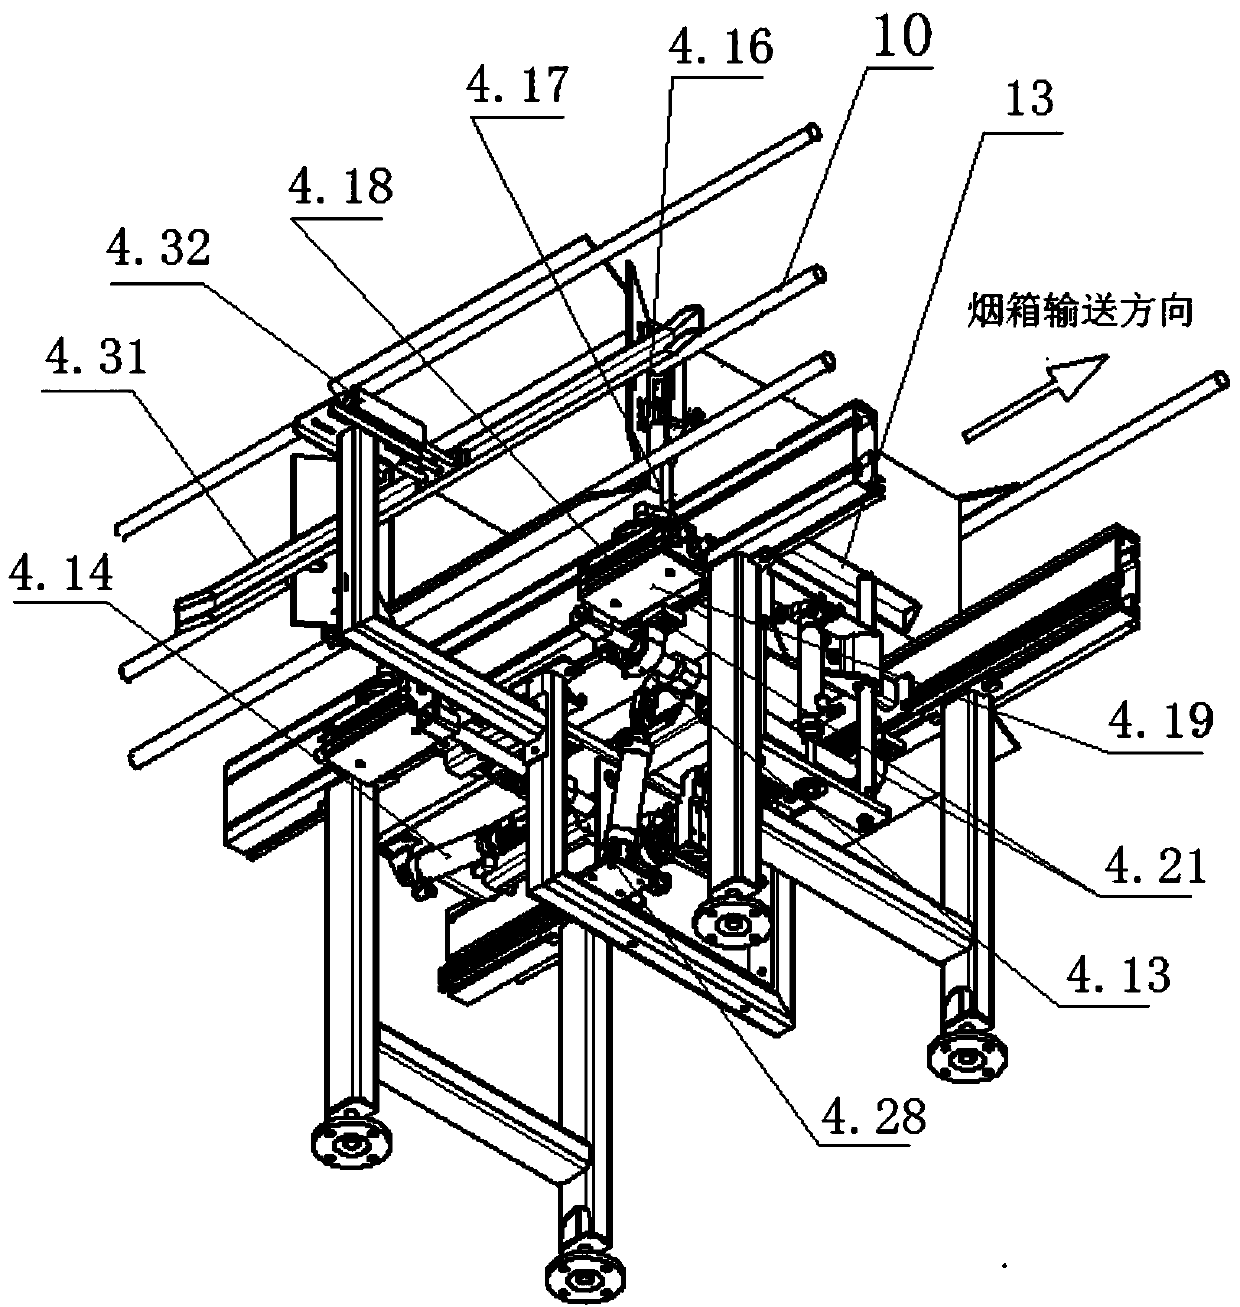 Opening mechanism for left side and right side seal covers of cigarette cartons